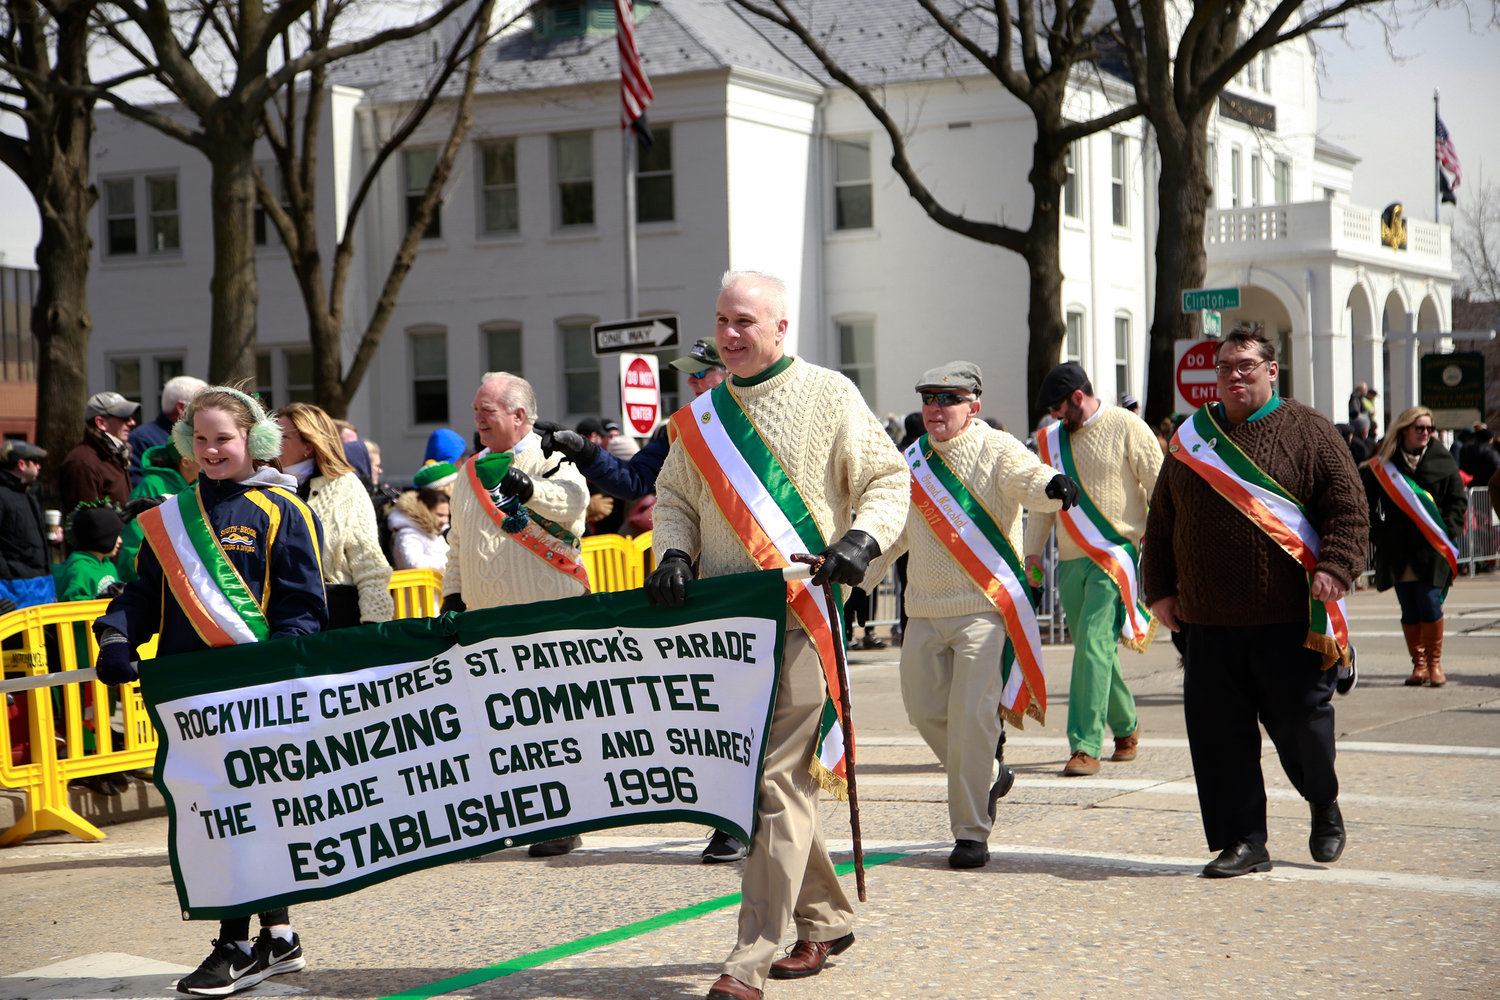 Last year's St. Patrick's Parade drew crowds of people to the streets of Rockville Centre. The 2020 parade has been postponed due to concerns over the spread of the novel coronavirus.